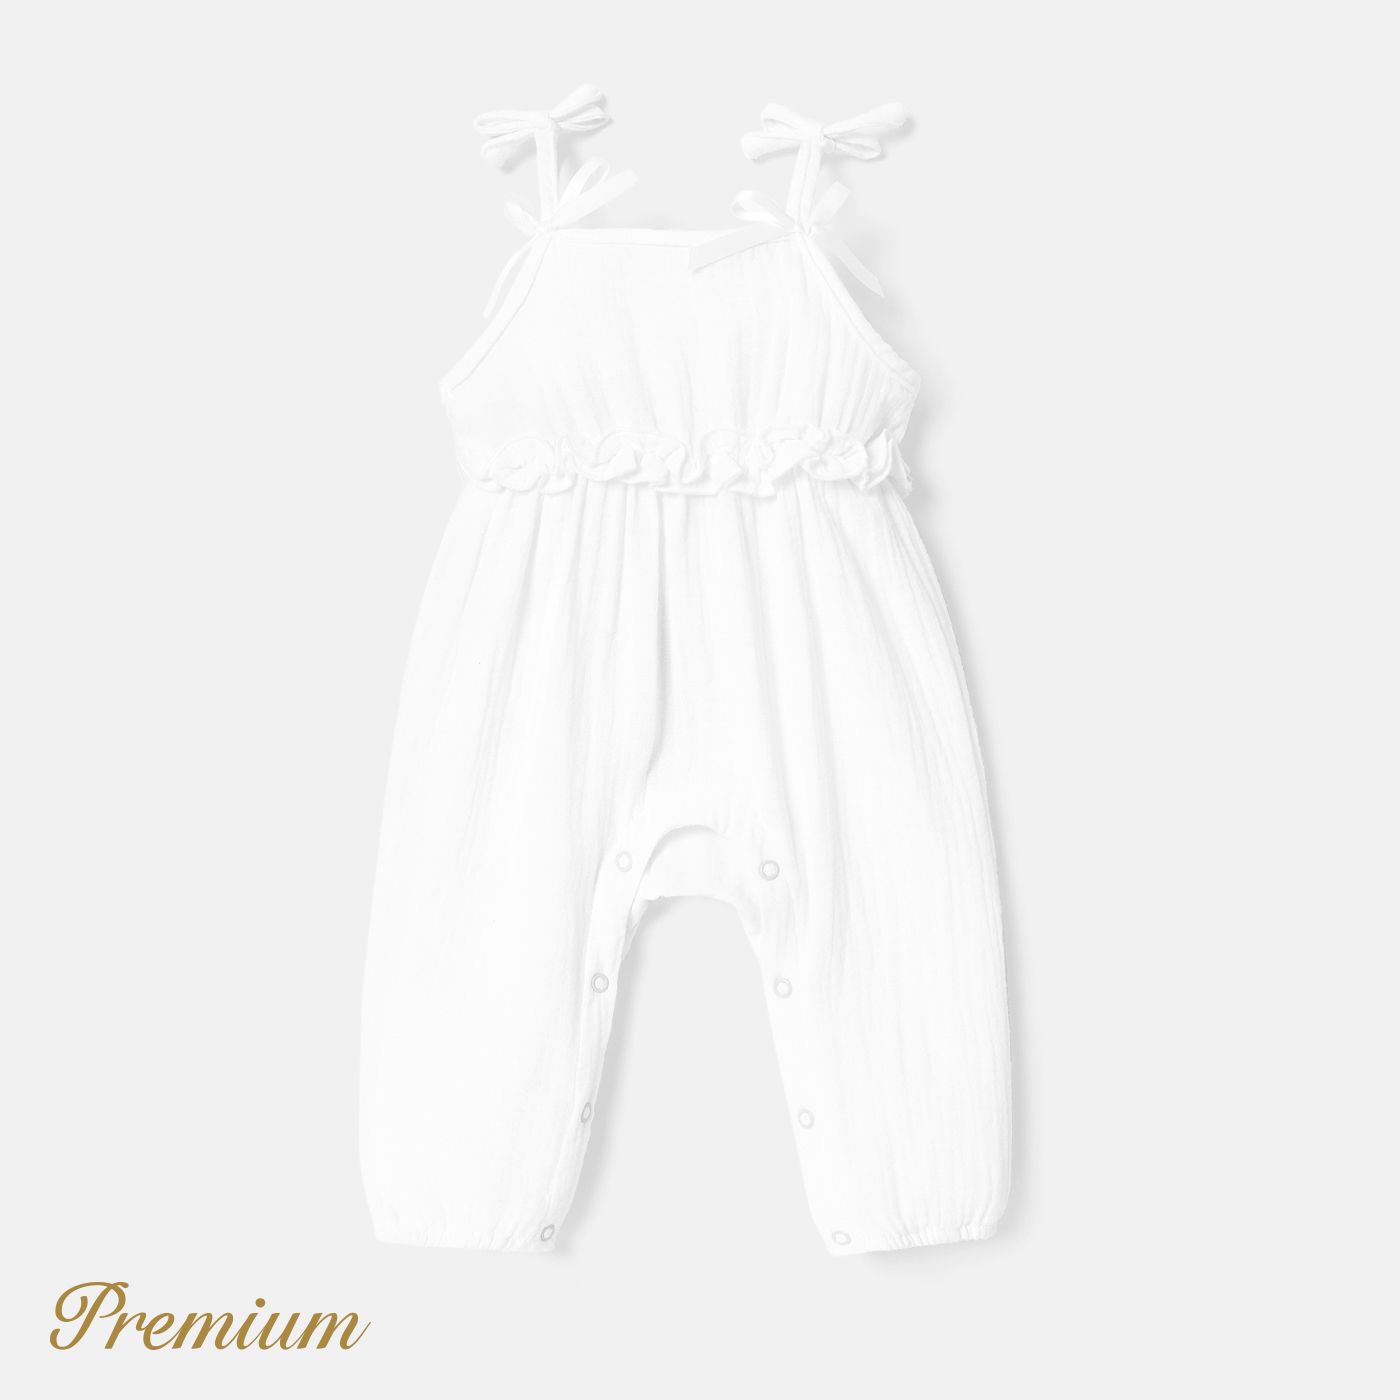 Baby Girl 100% Cotton Crepe Bow Decor Solid Cami Jumpsuit